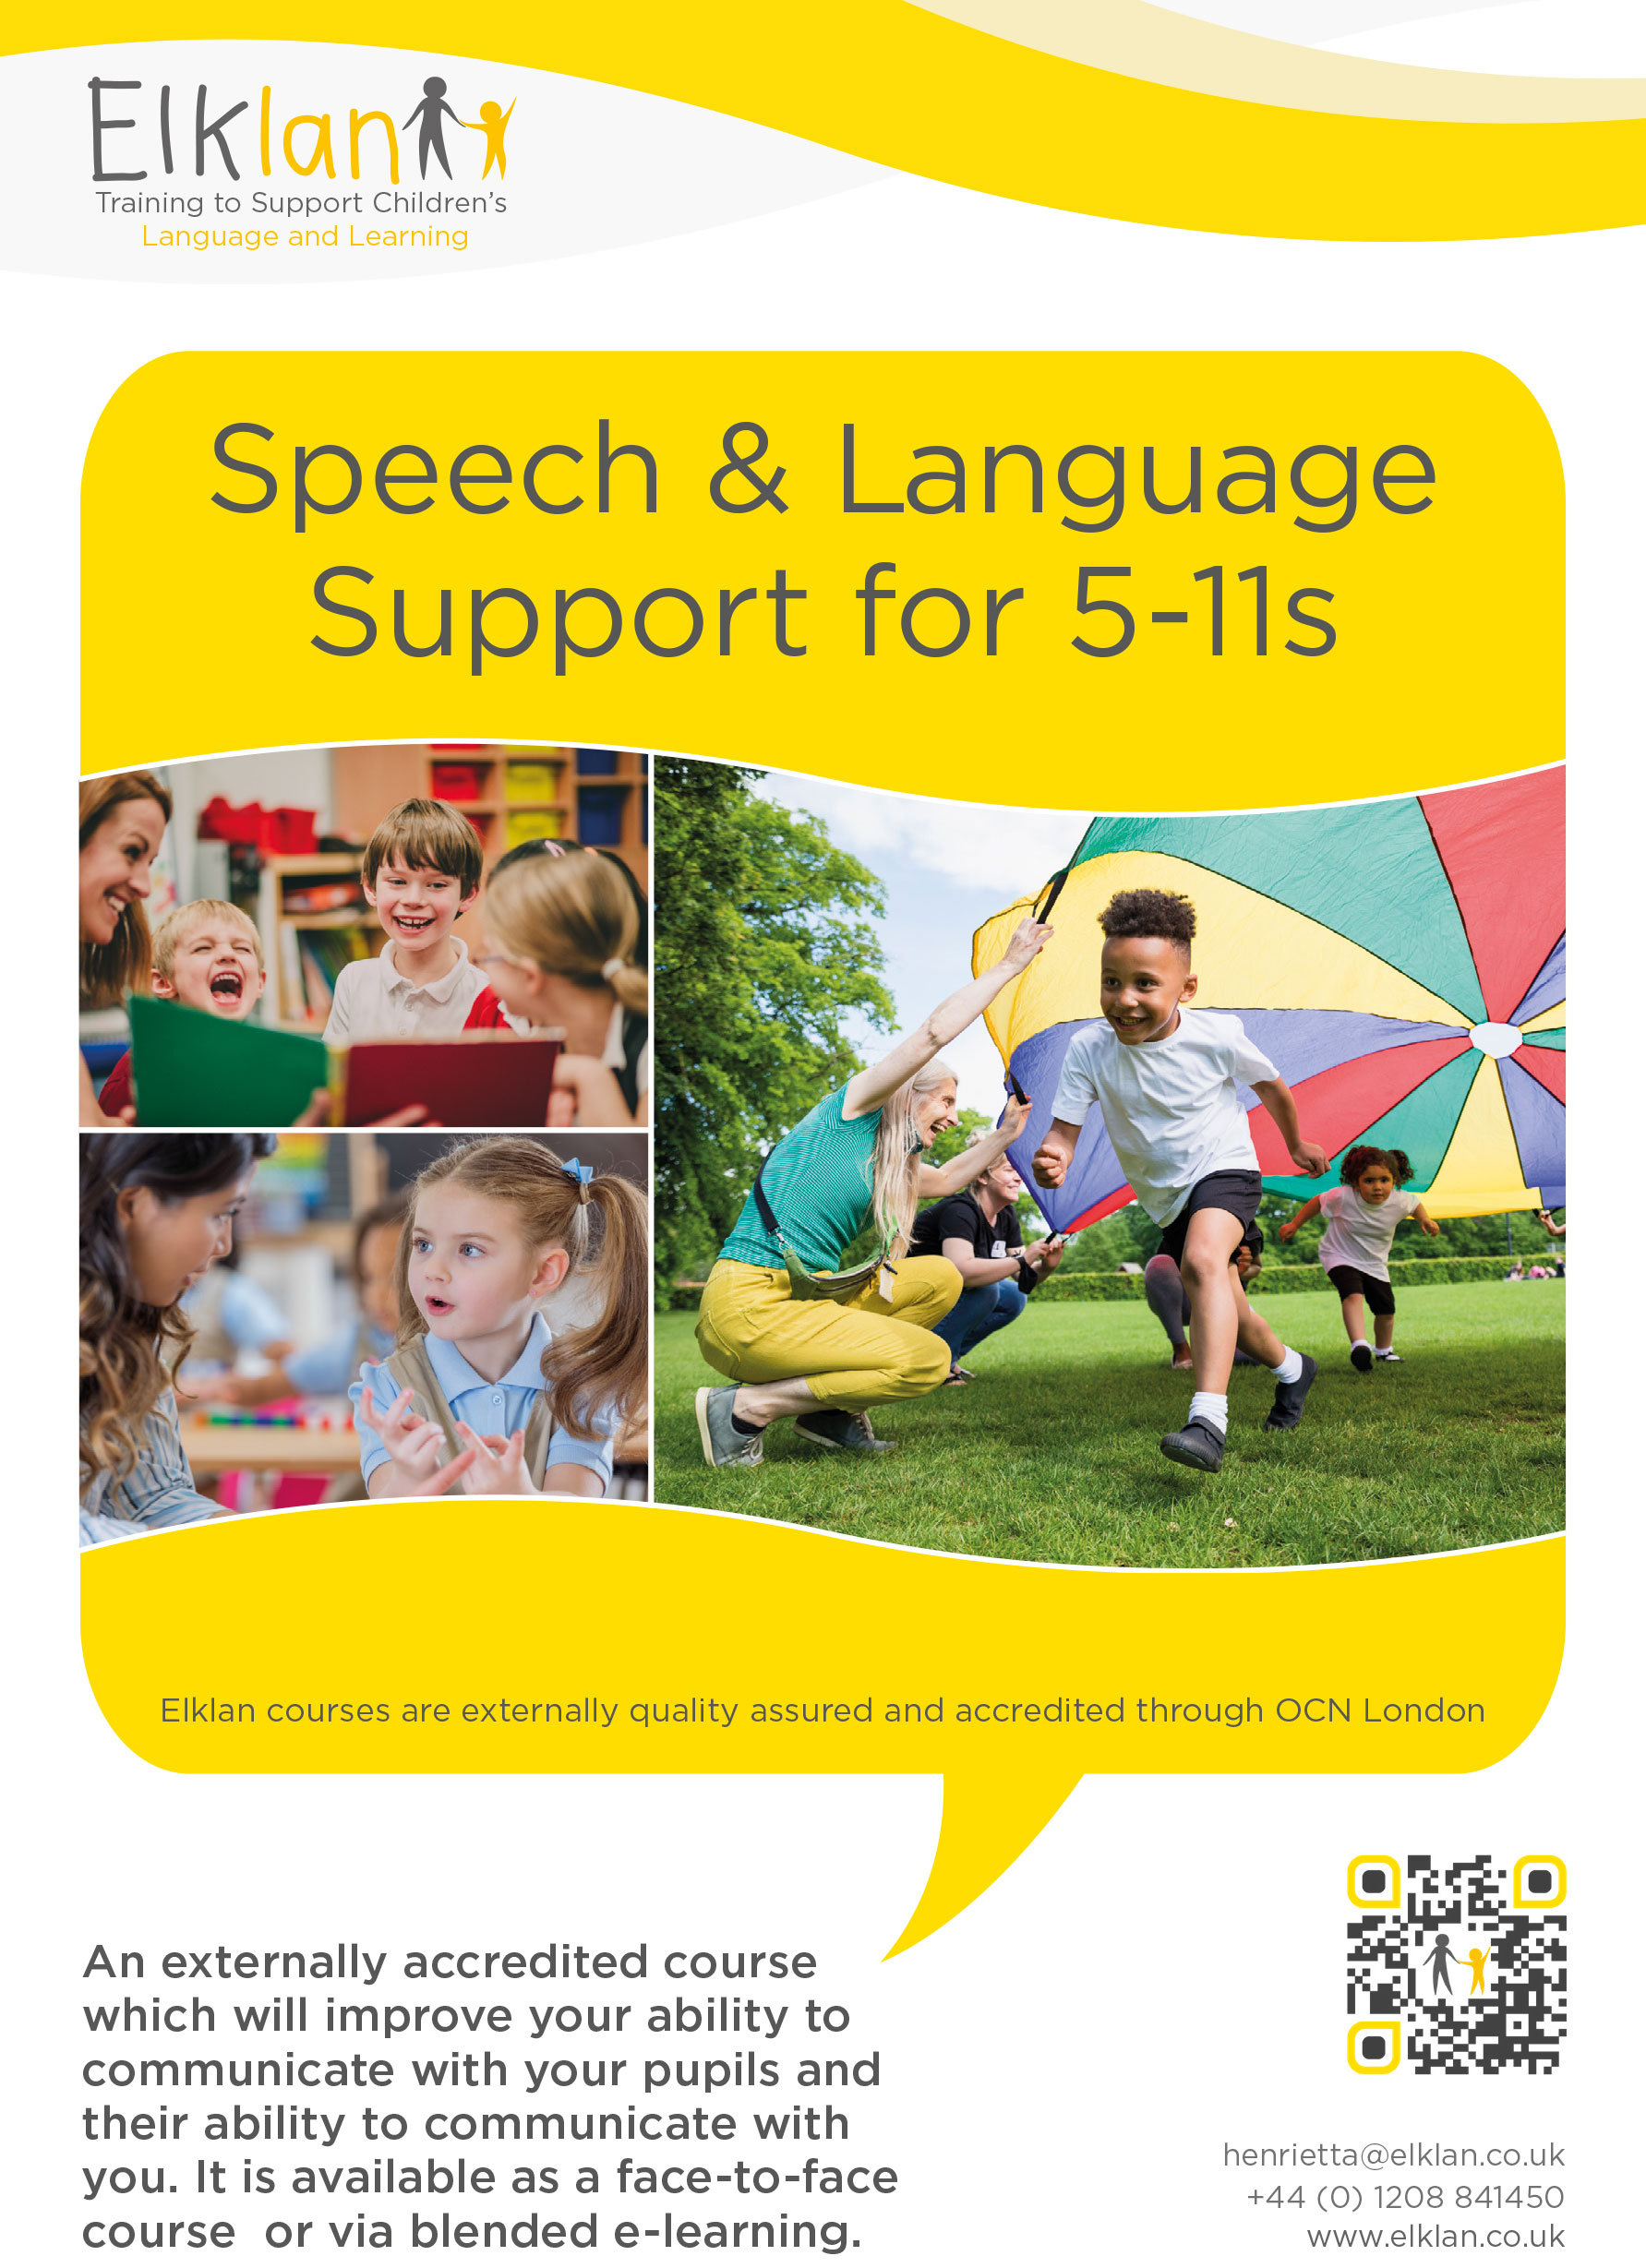 Speech and Language Support for 5-11s flyer - 100 copies